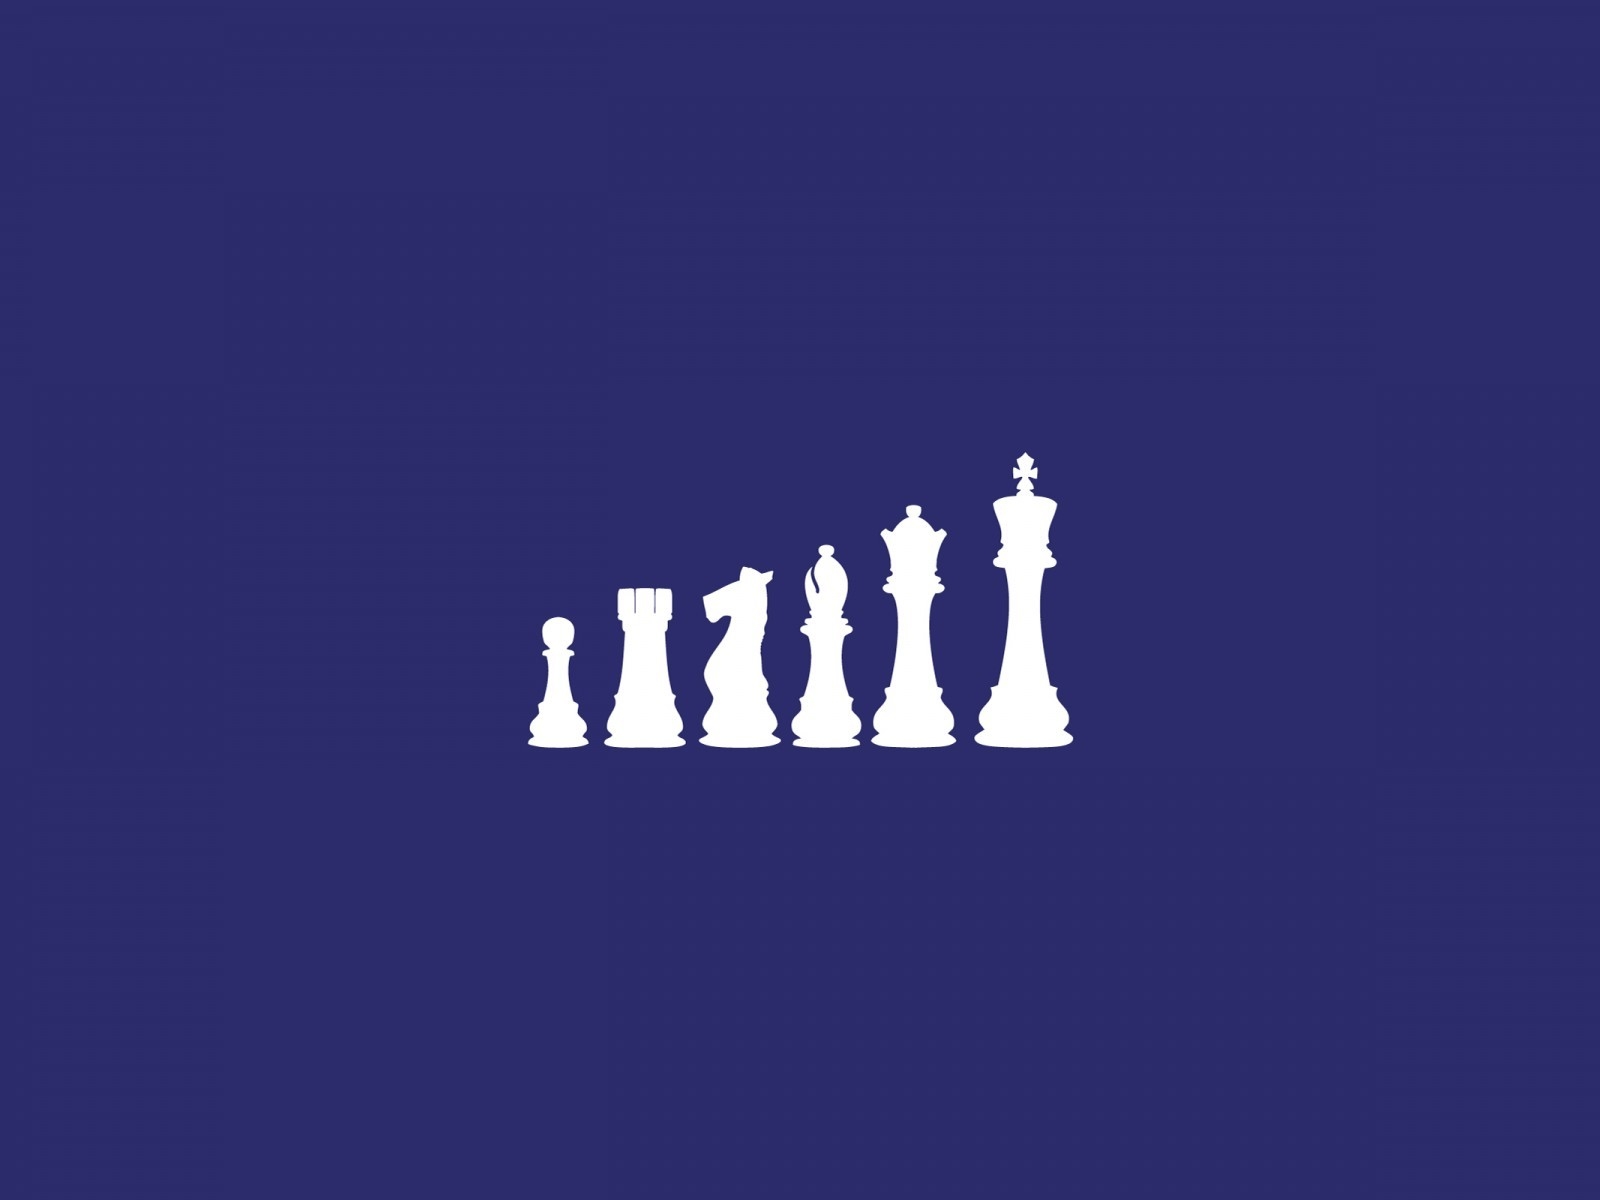 Chess Figures for 1600 x 1200 resolution